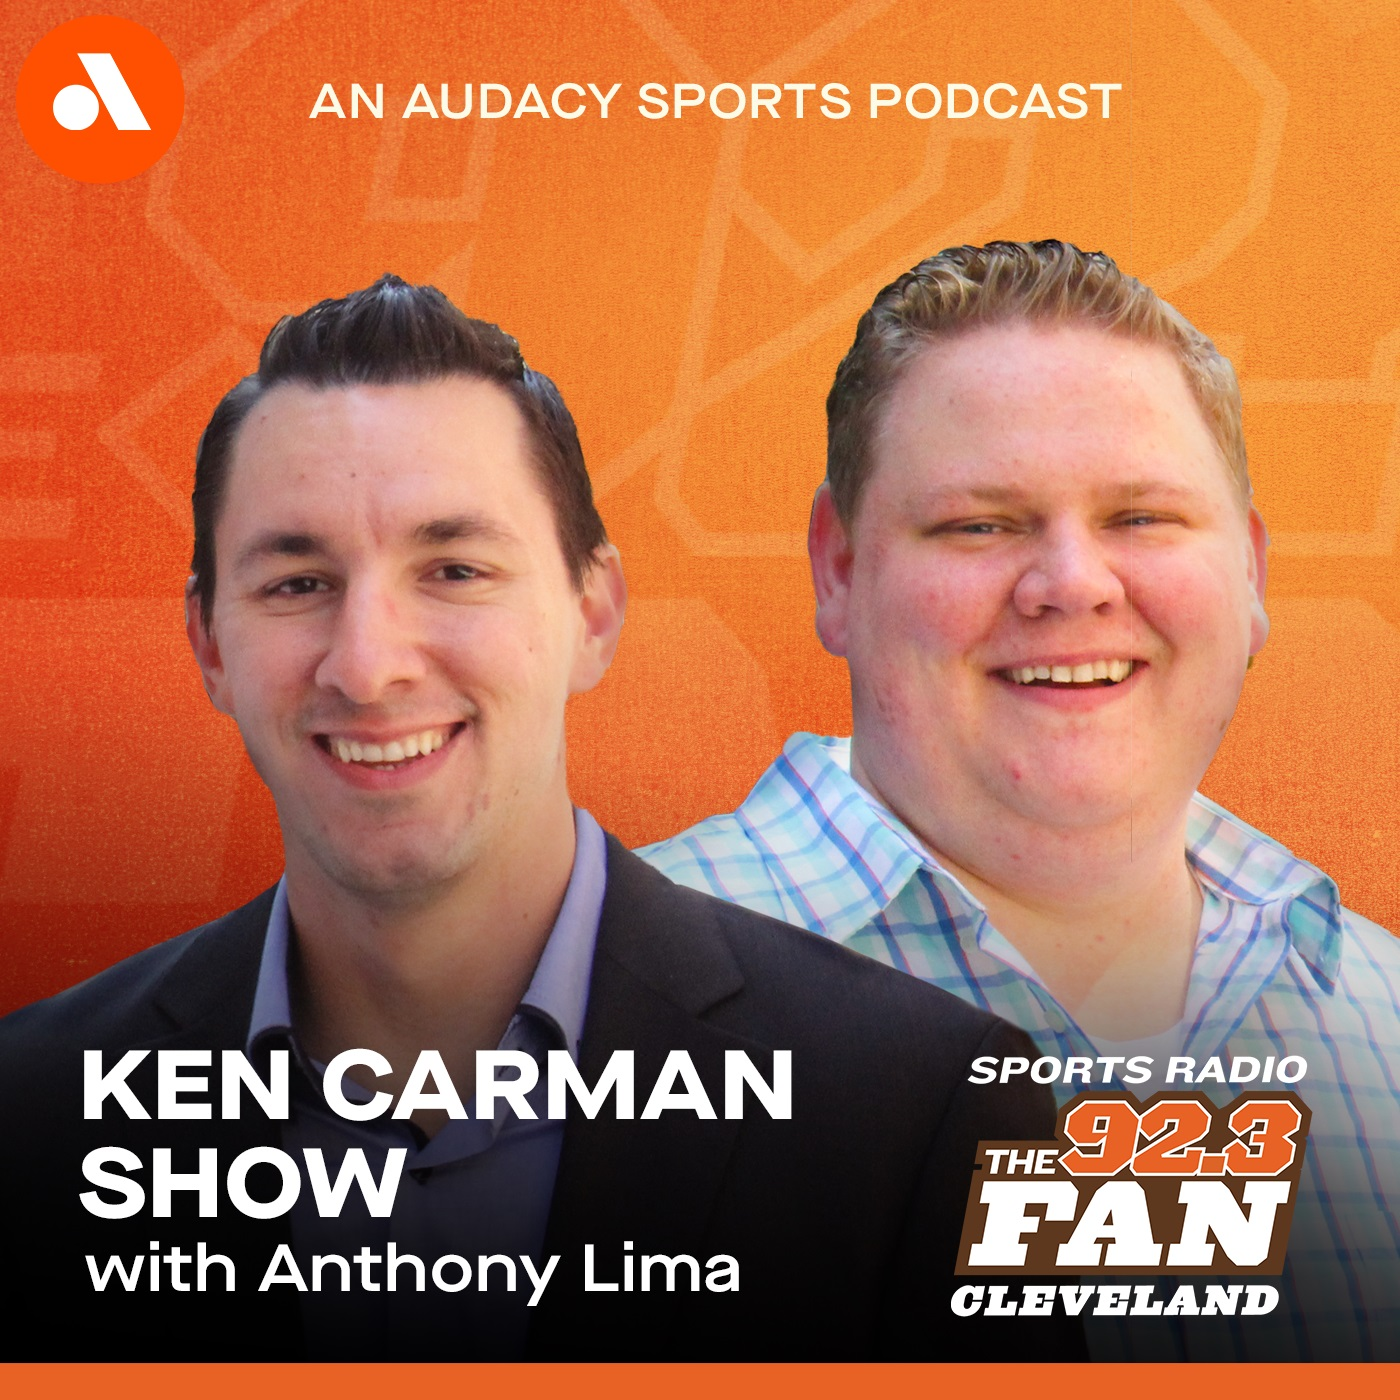 Hour 1: The Ken Carman Show with Anthony Lima reacts to the Browns 31-27 win over the Jaguars